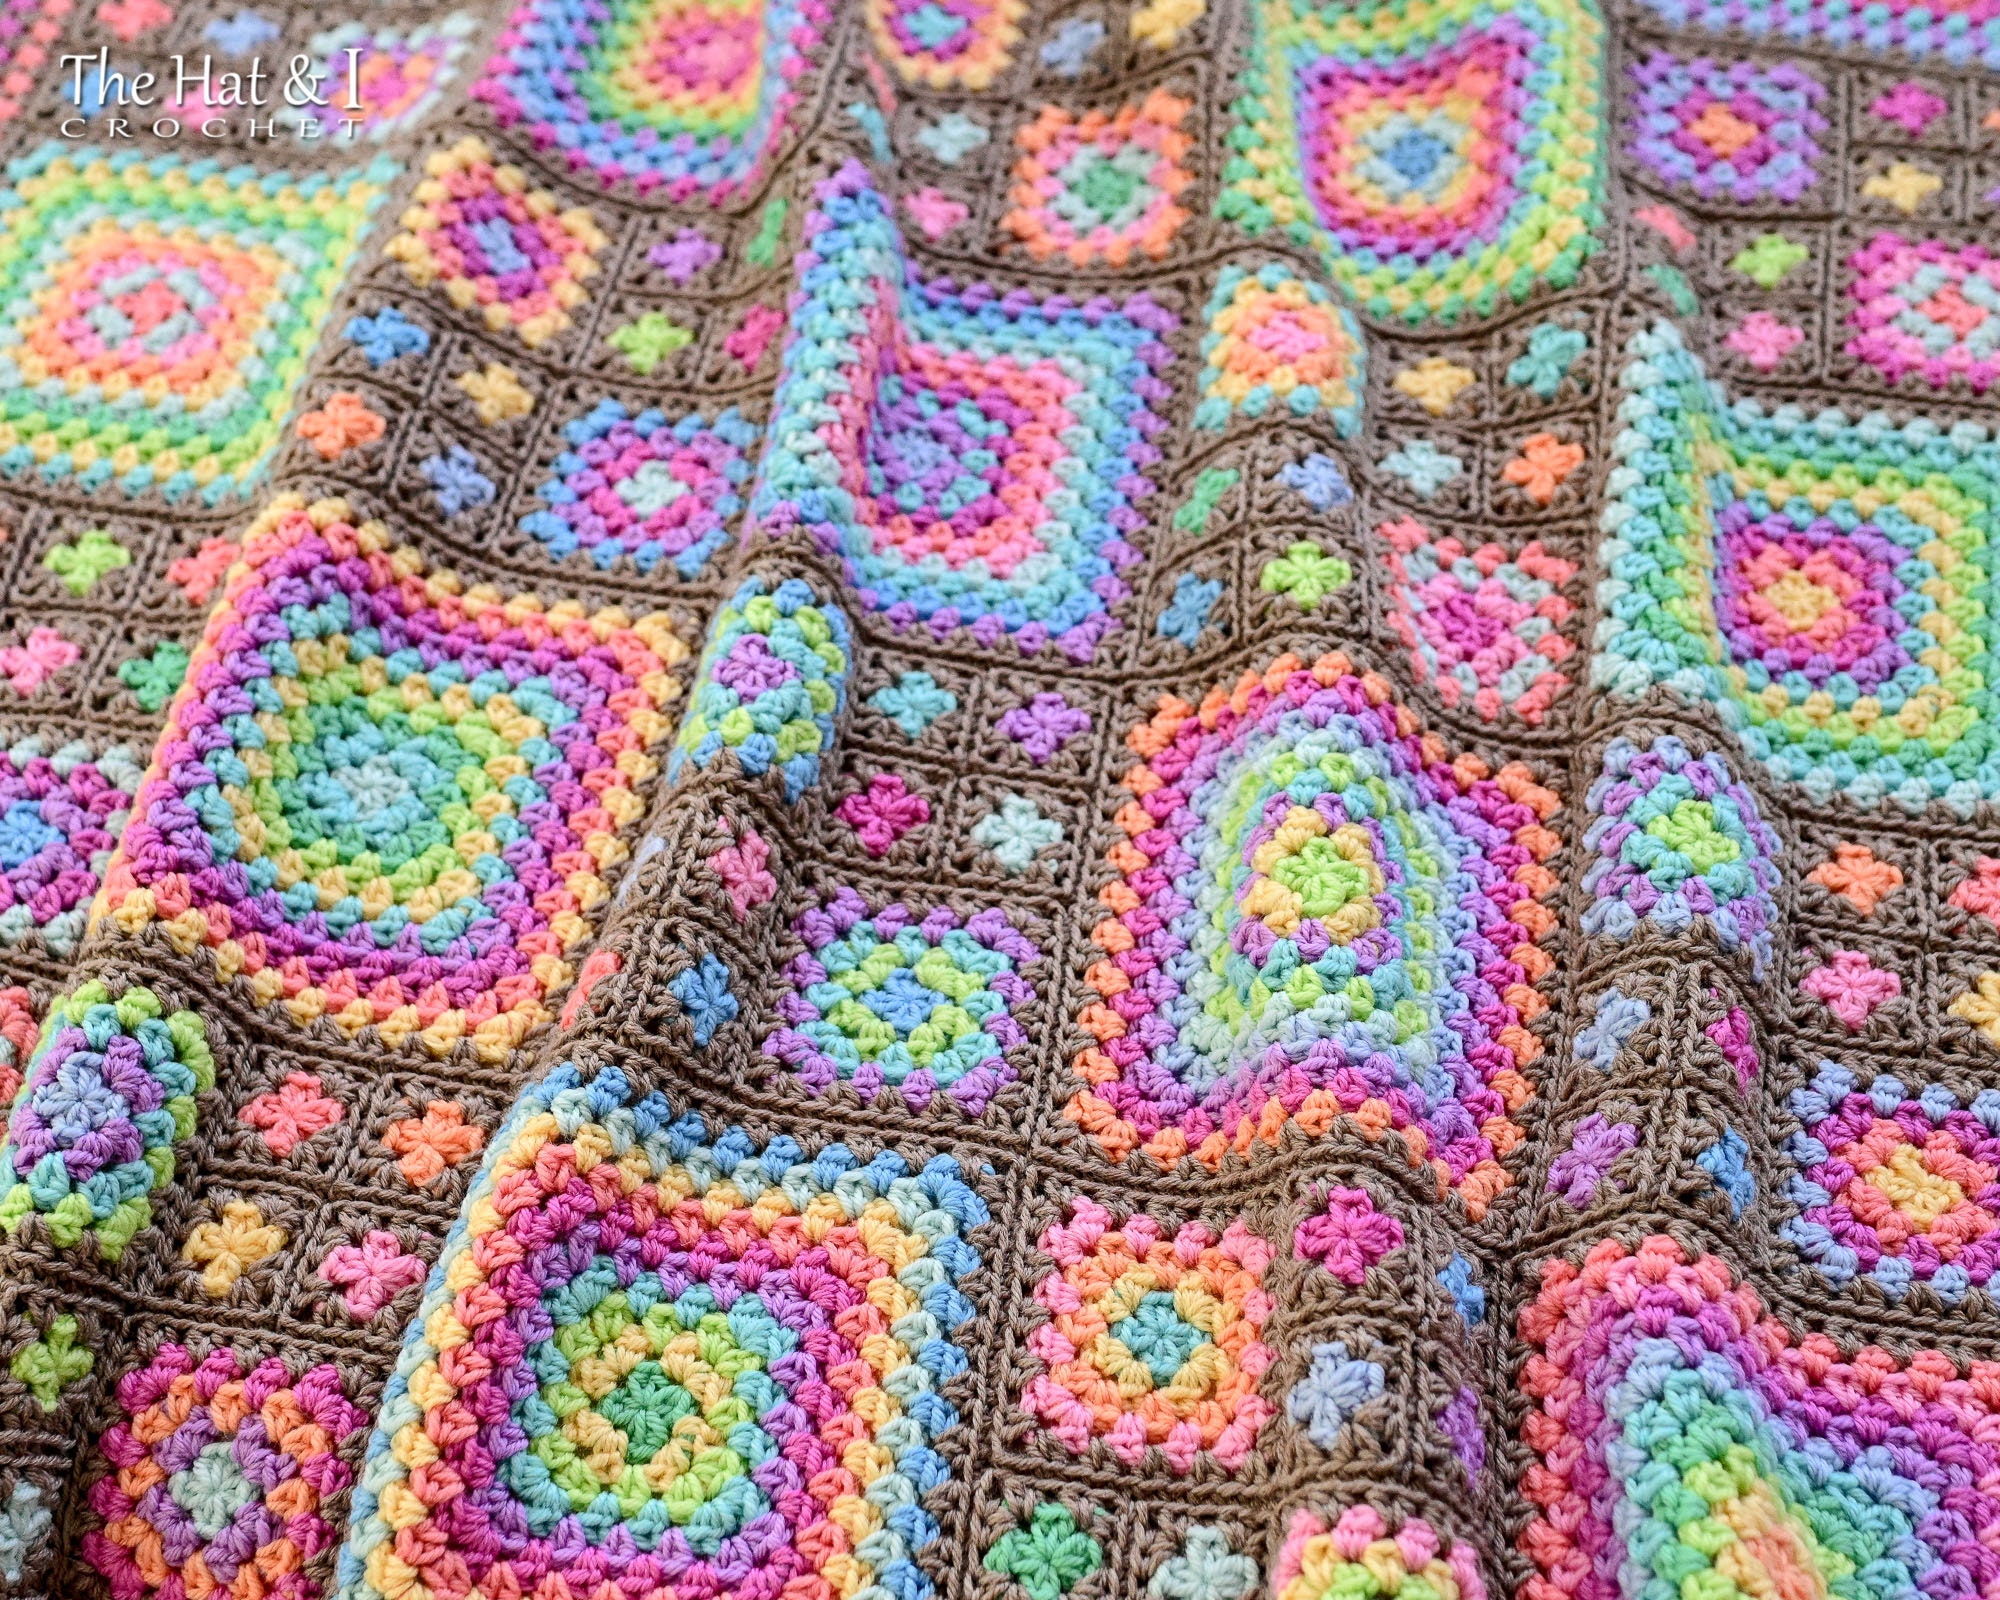 A Modern Guide to Granny Squares BOOK REVIEW - MUST HAVE REFERENCE